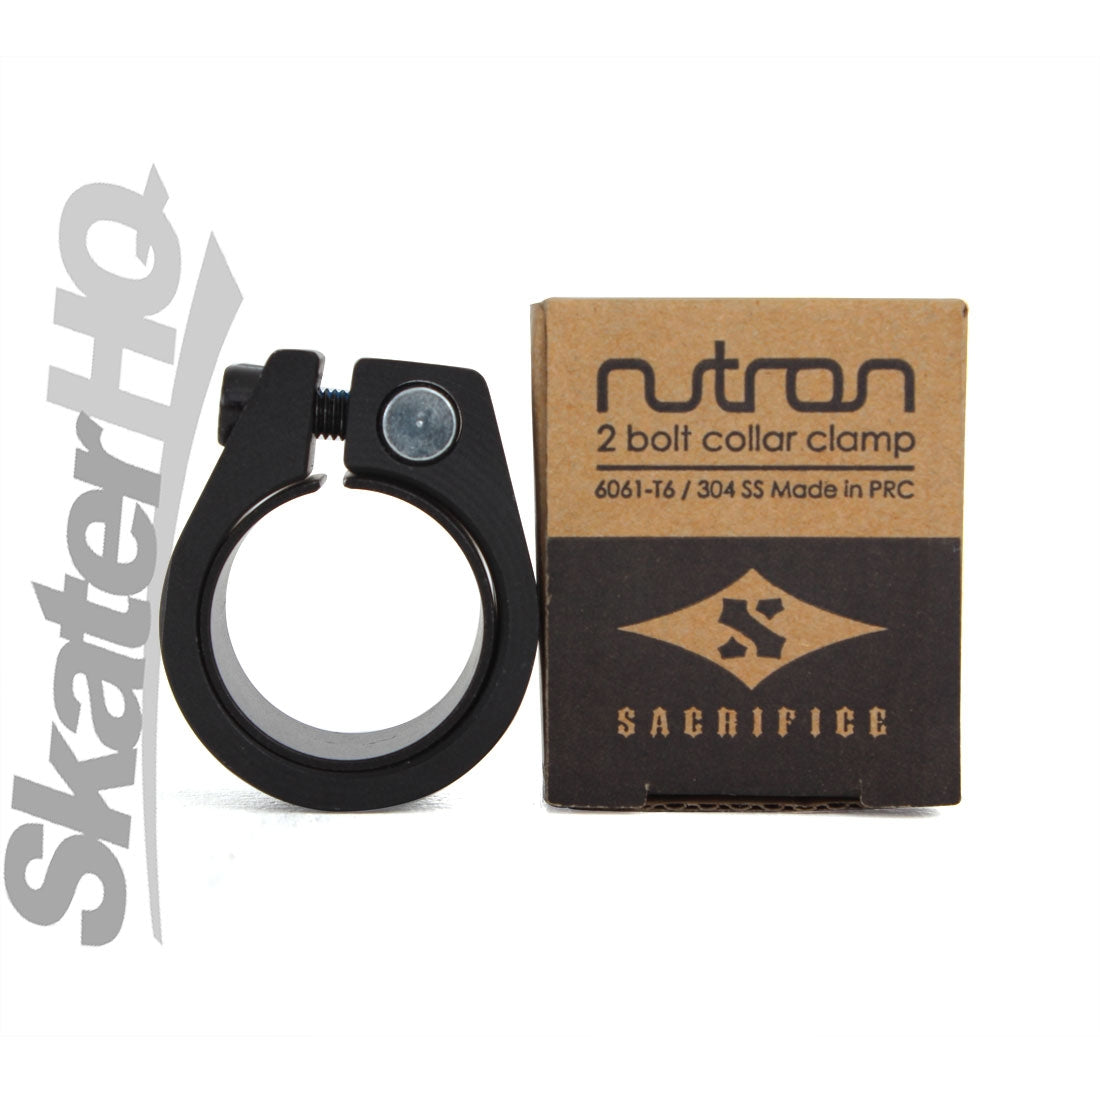 Sacrifice Nutron Collar Clamp - Black Scooter Headsets and Clamps